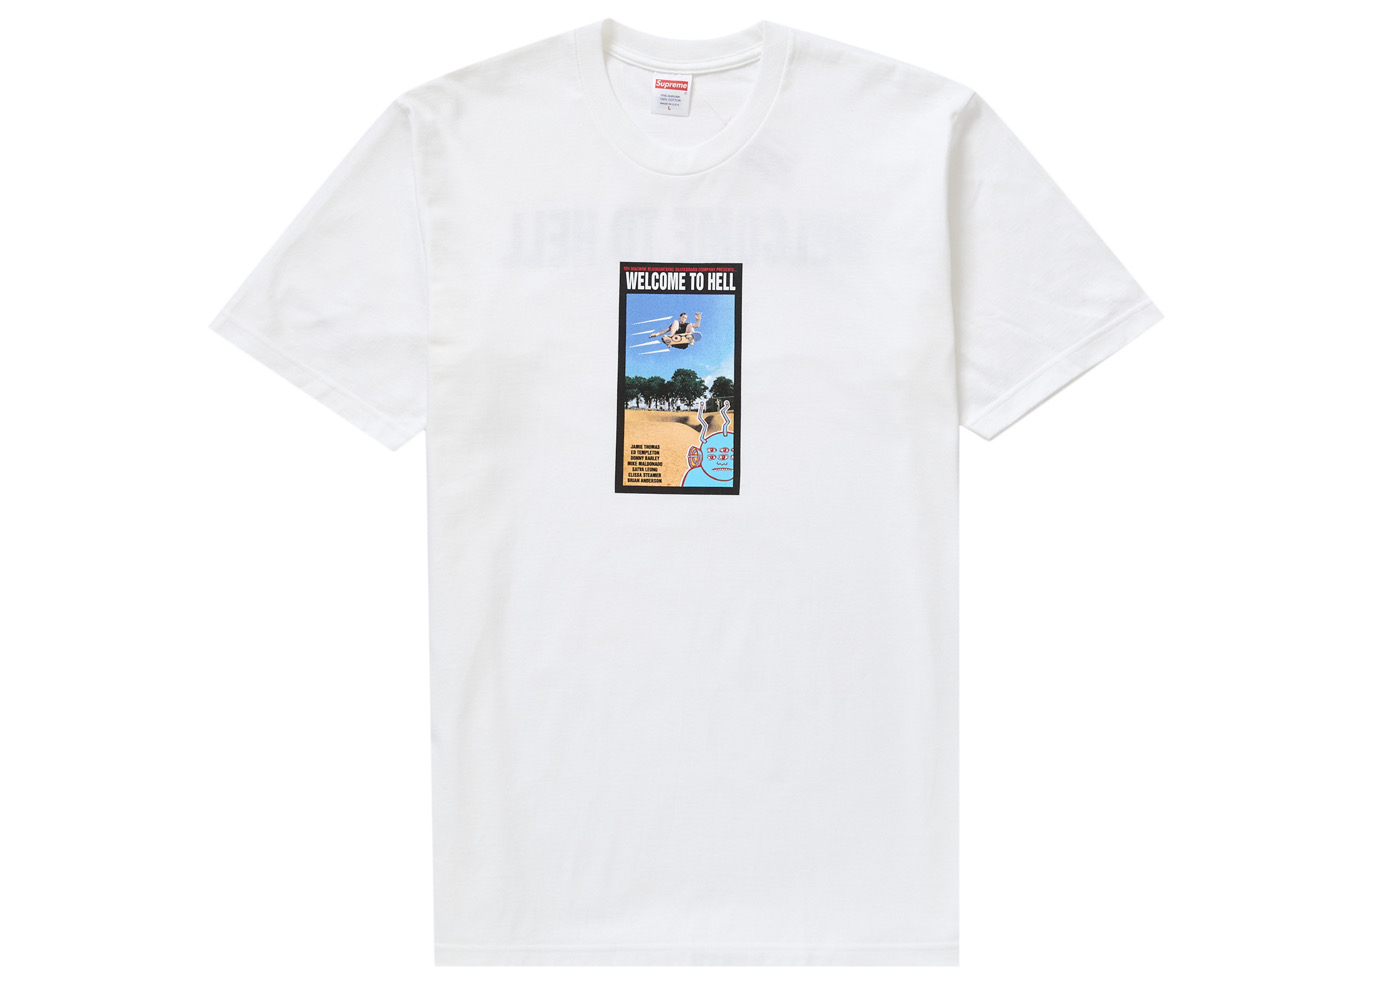 Supreme Toy Machine Welcome To Hell Tee Heather Grey Men's - SS24 - US